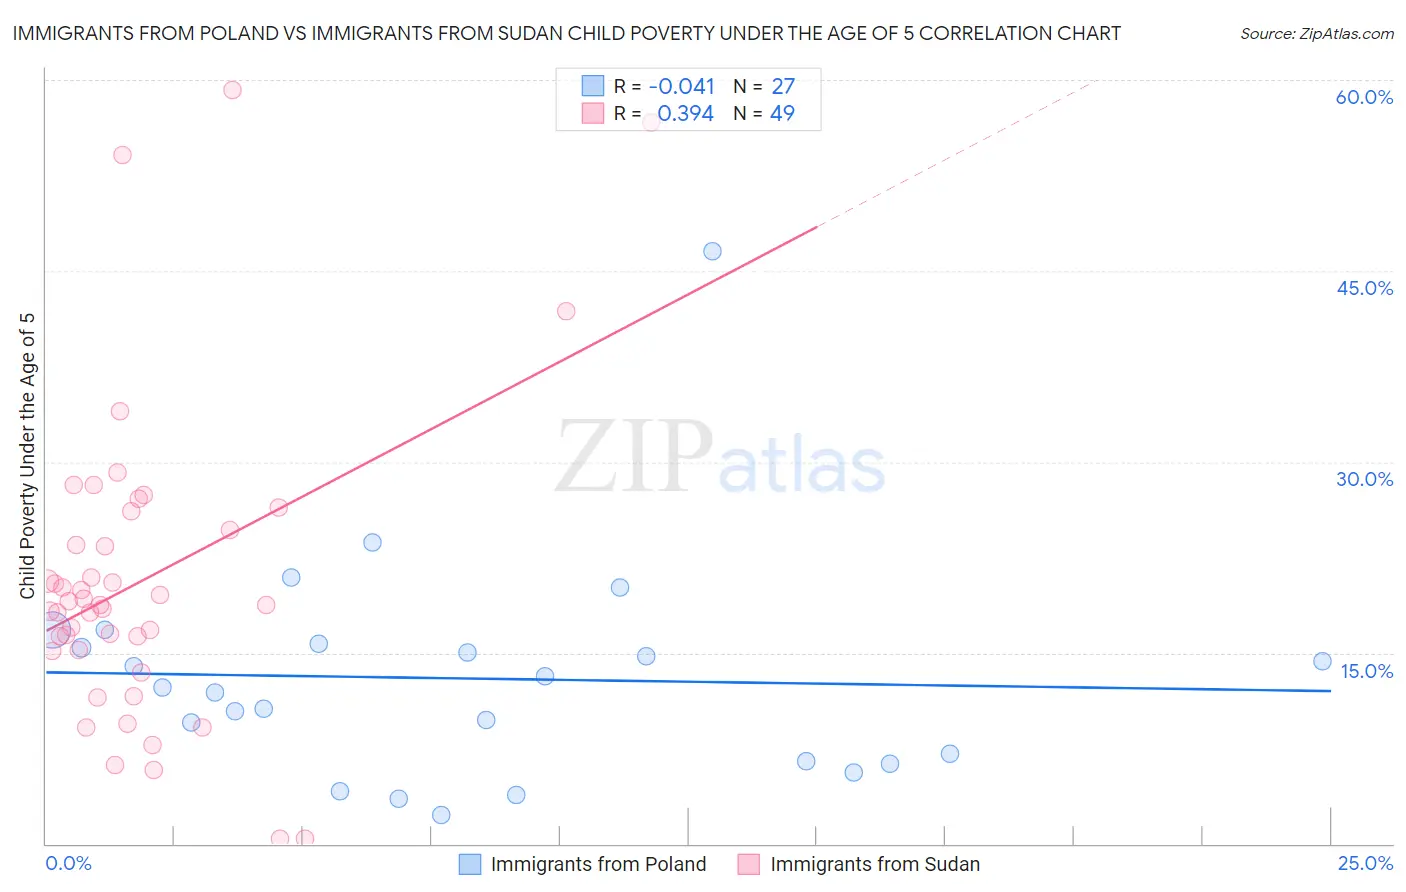 Immigrants from Poland vs Immigrants from Sudan Child Poverty Under the Age of 5